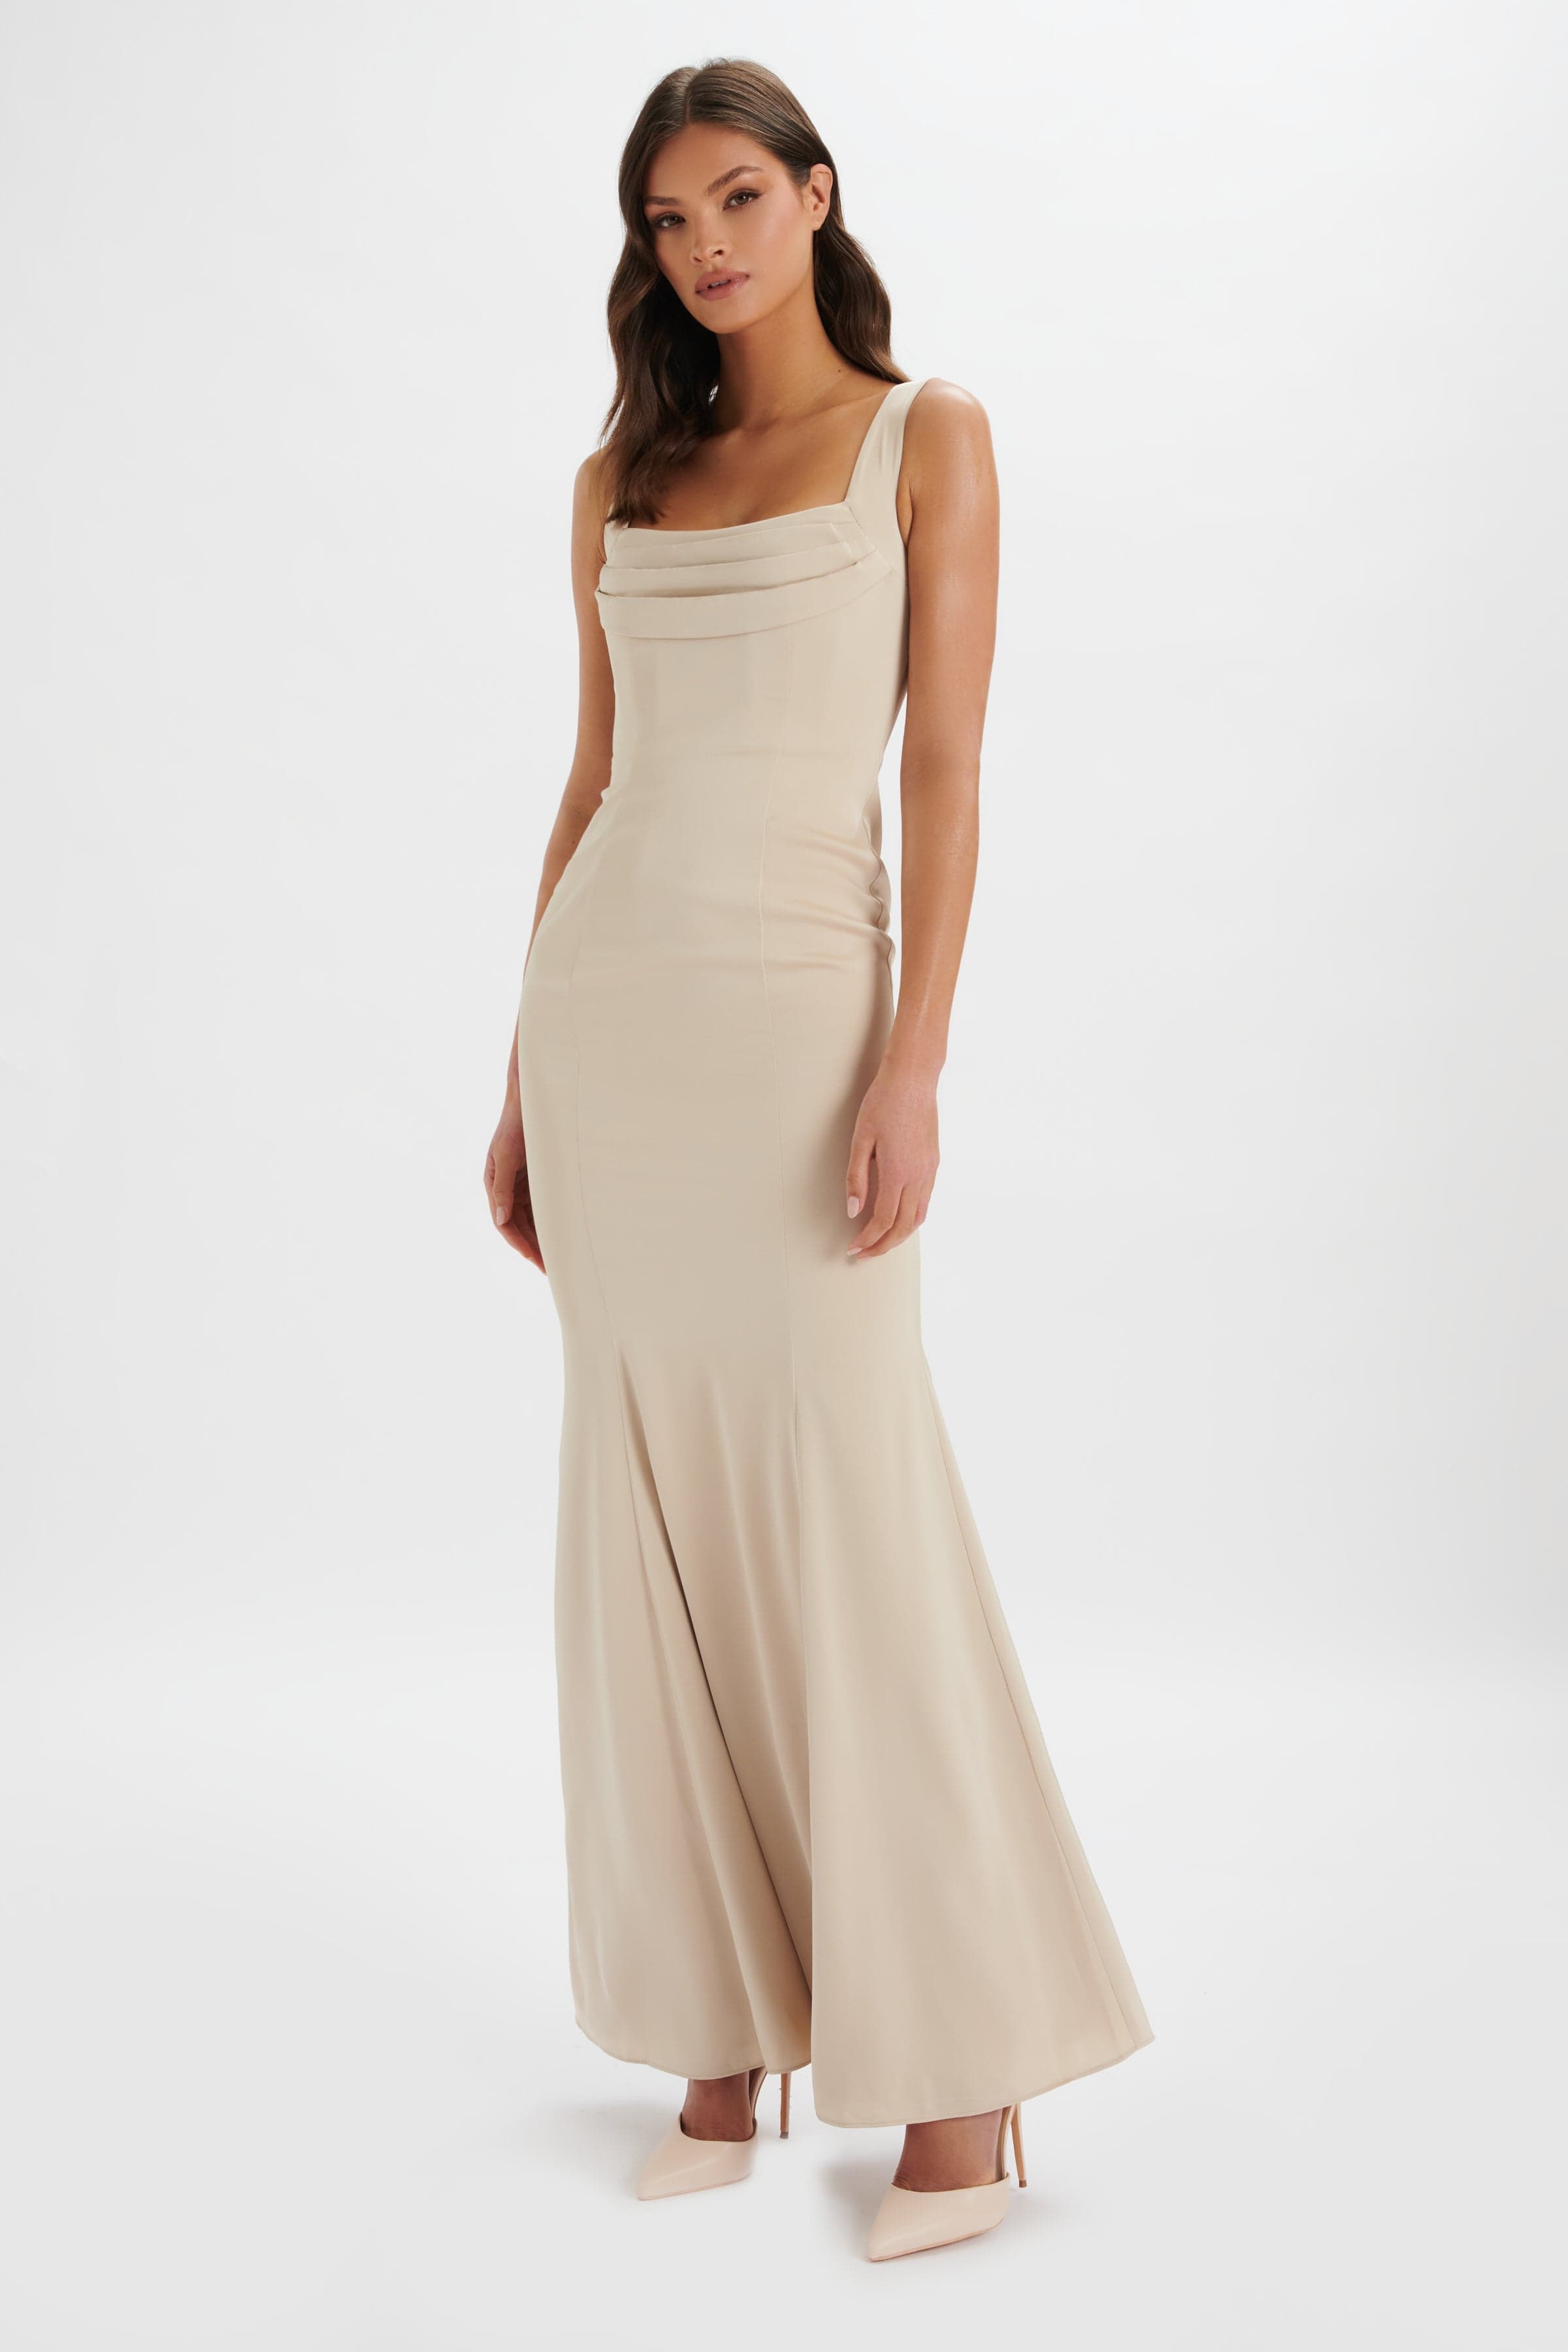 TARA Structured Satin Cowl Front Maxi Dress in Champagne